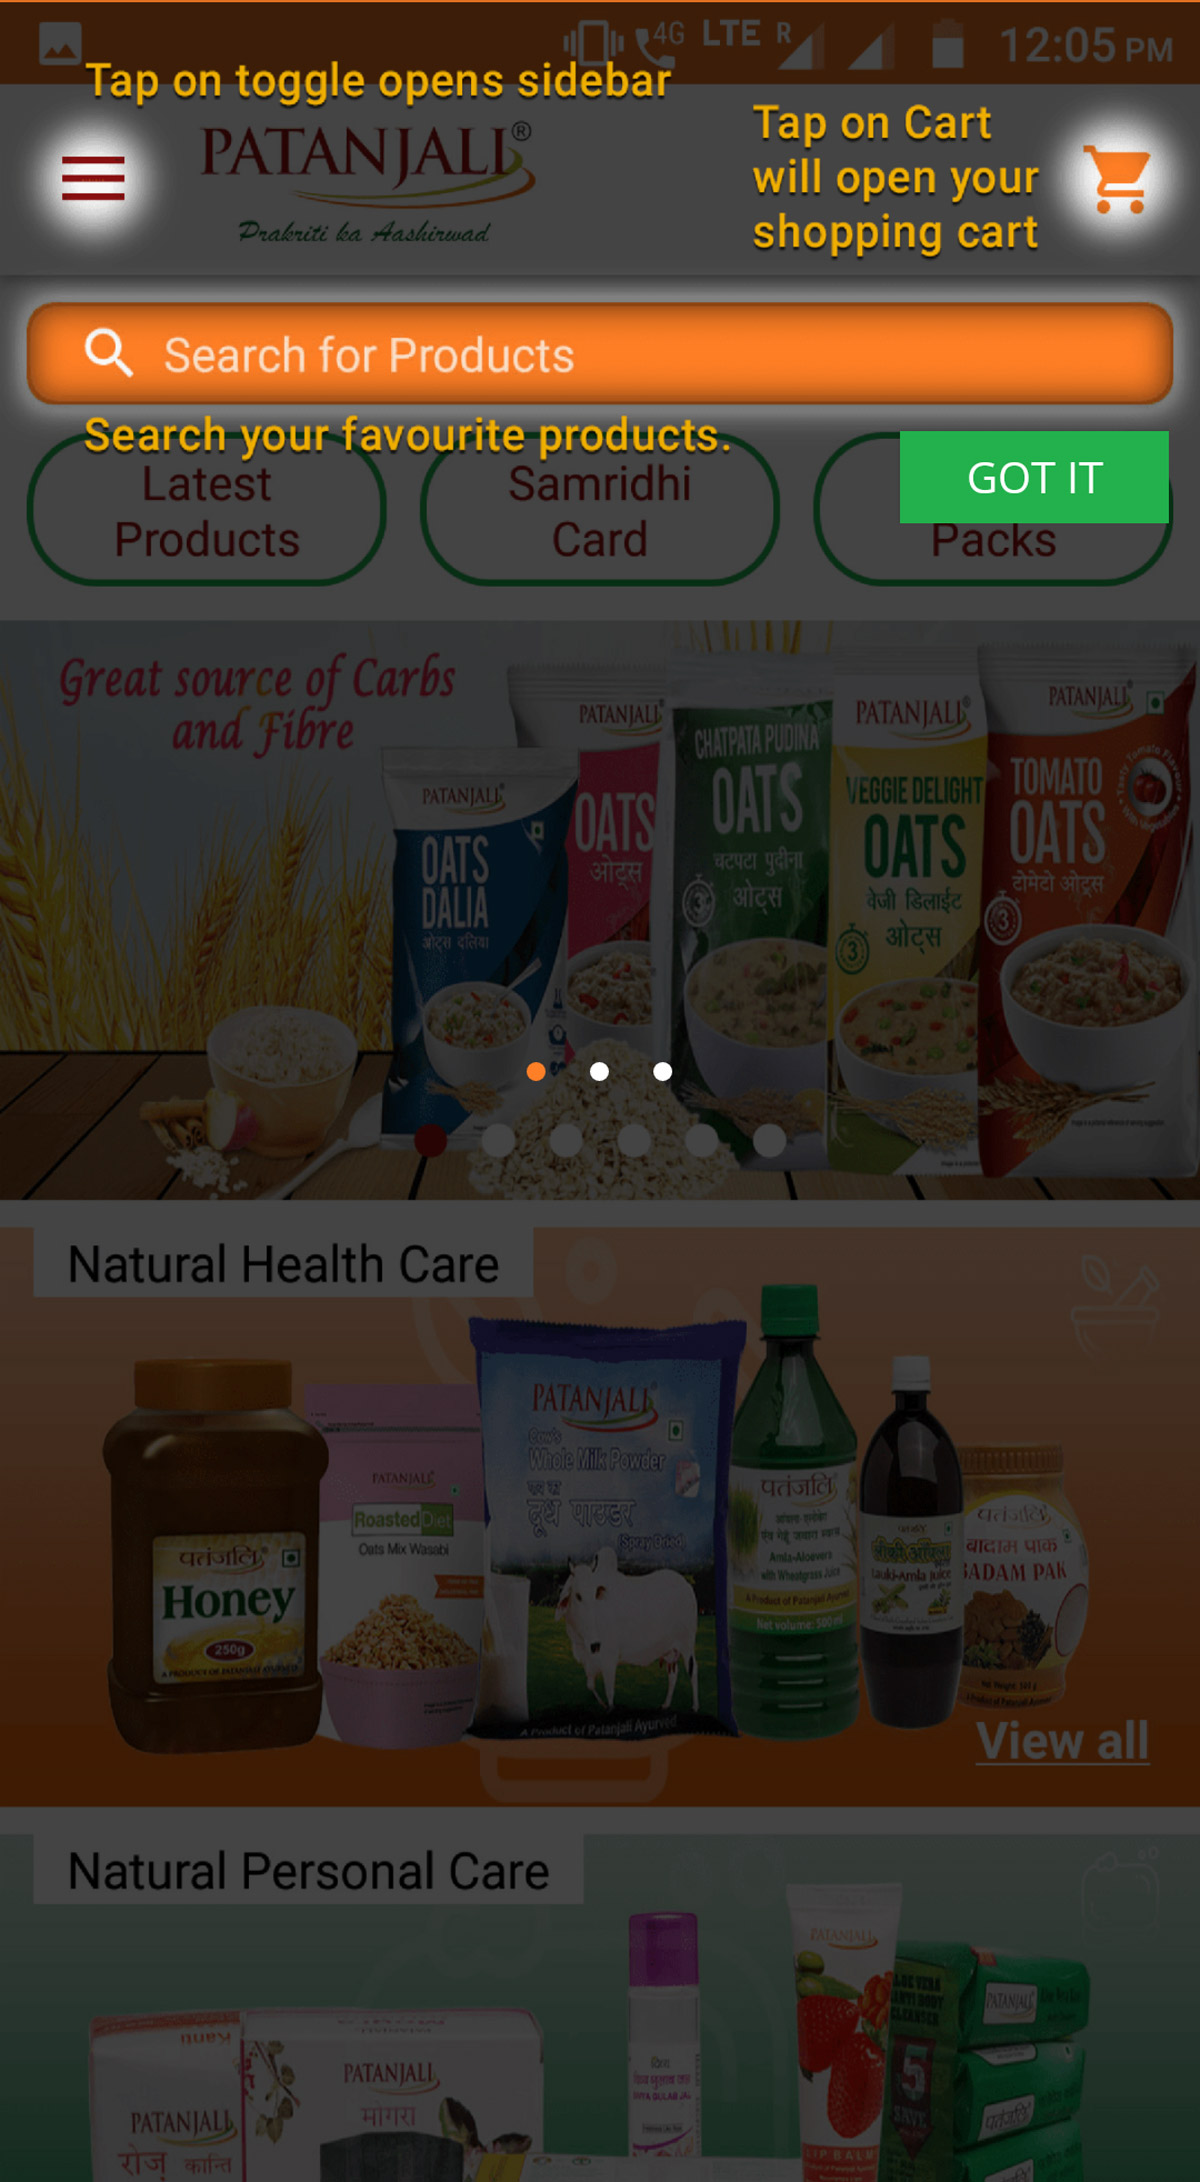 The Patanjali ecommerce app with its product catalogue